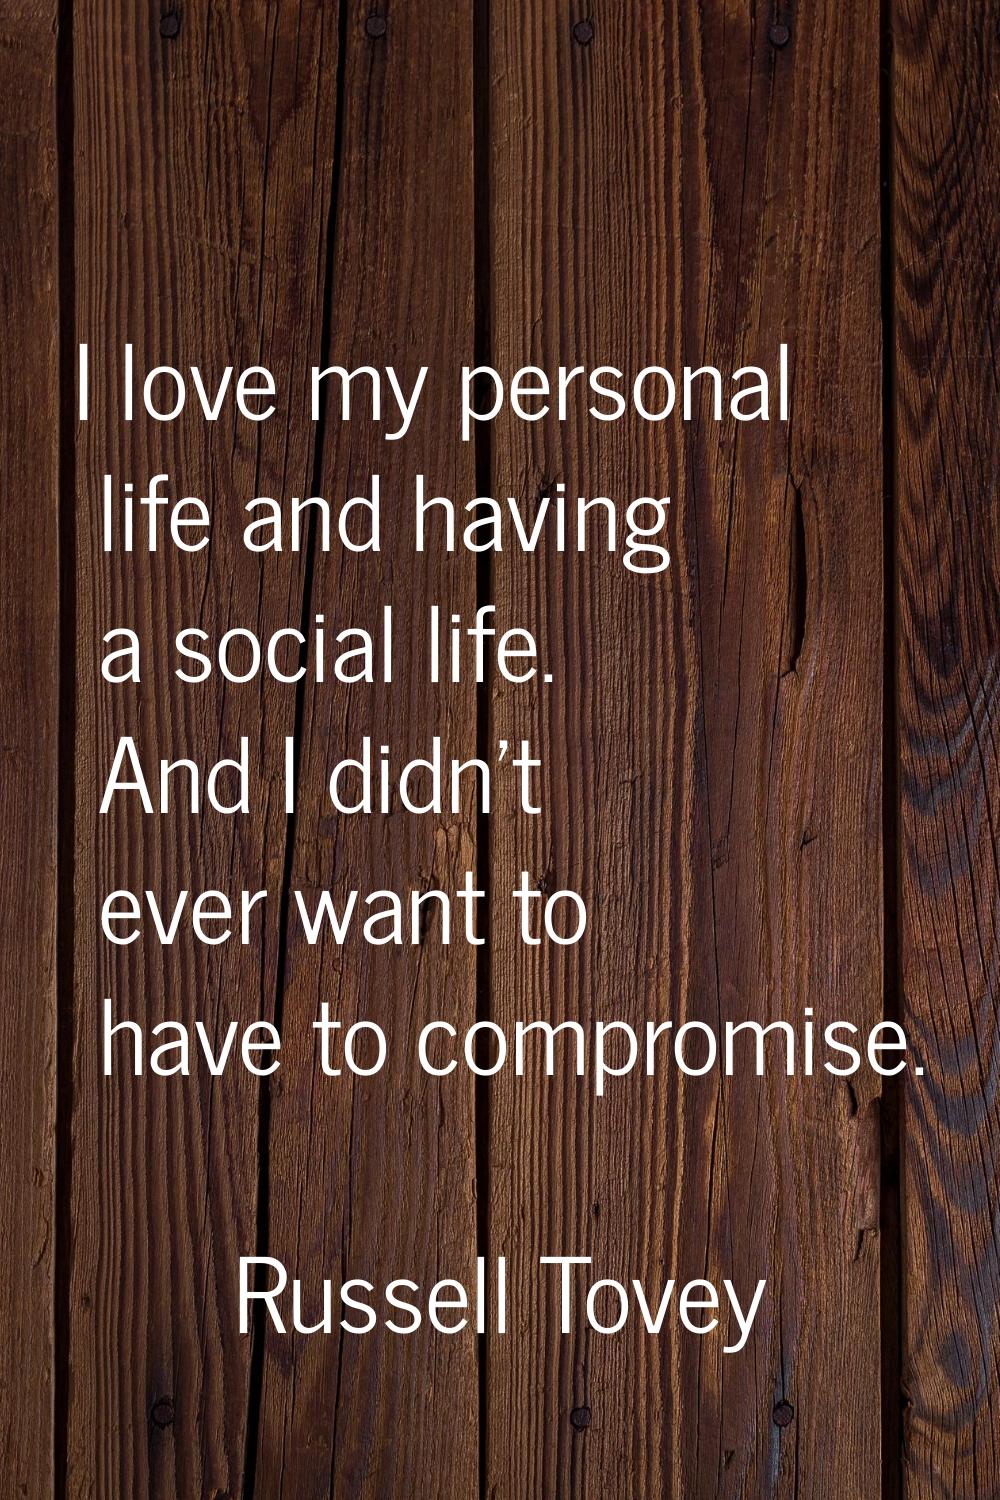 I love my personal life and having a social life. And I didn't ever want to have to compromise.